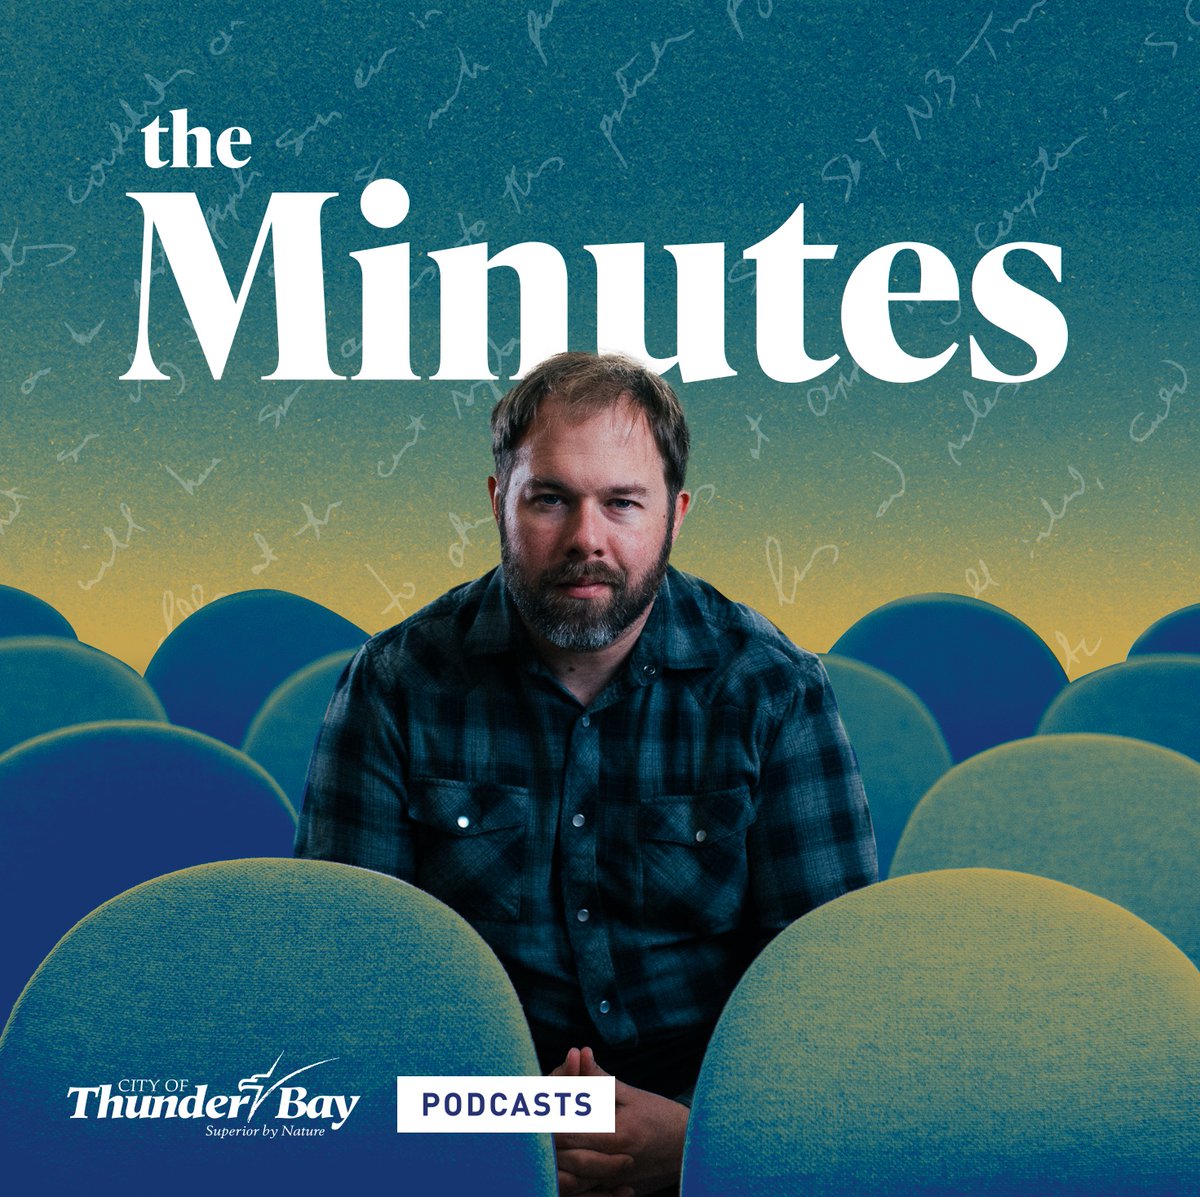 The latest episode of #TheMinutes is now online! We talk about changes to curbside recycling, updates to the Asset Management Plan, and give a rundown of City Council. Find The Minutes at thunderbay.ca/theminutes or wherever you get your podcasts. #Tbay